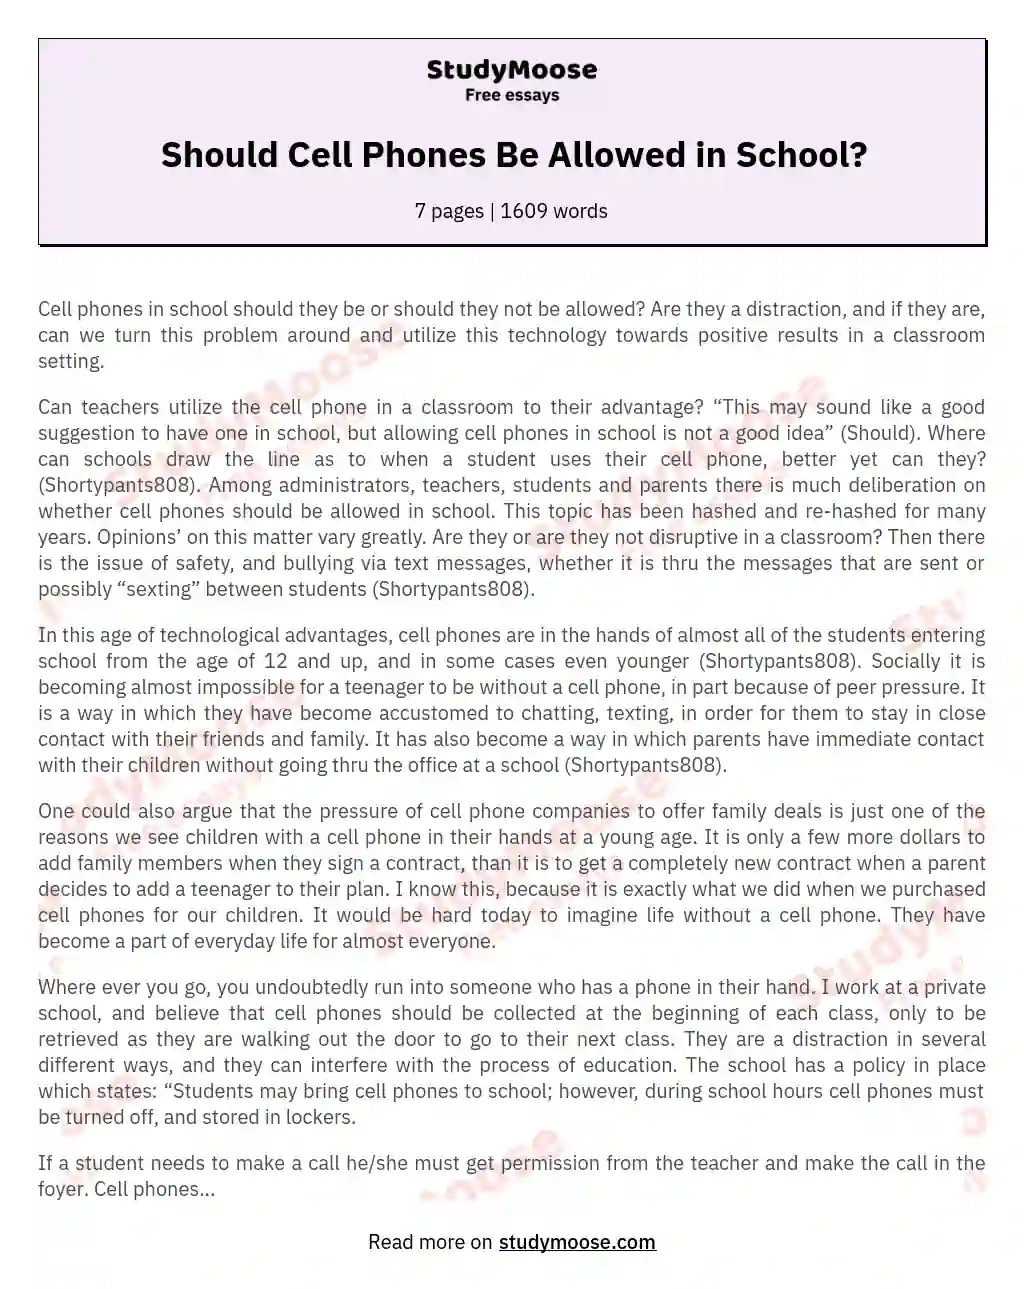 Should Cell Phones Be Allowed in School? essay